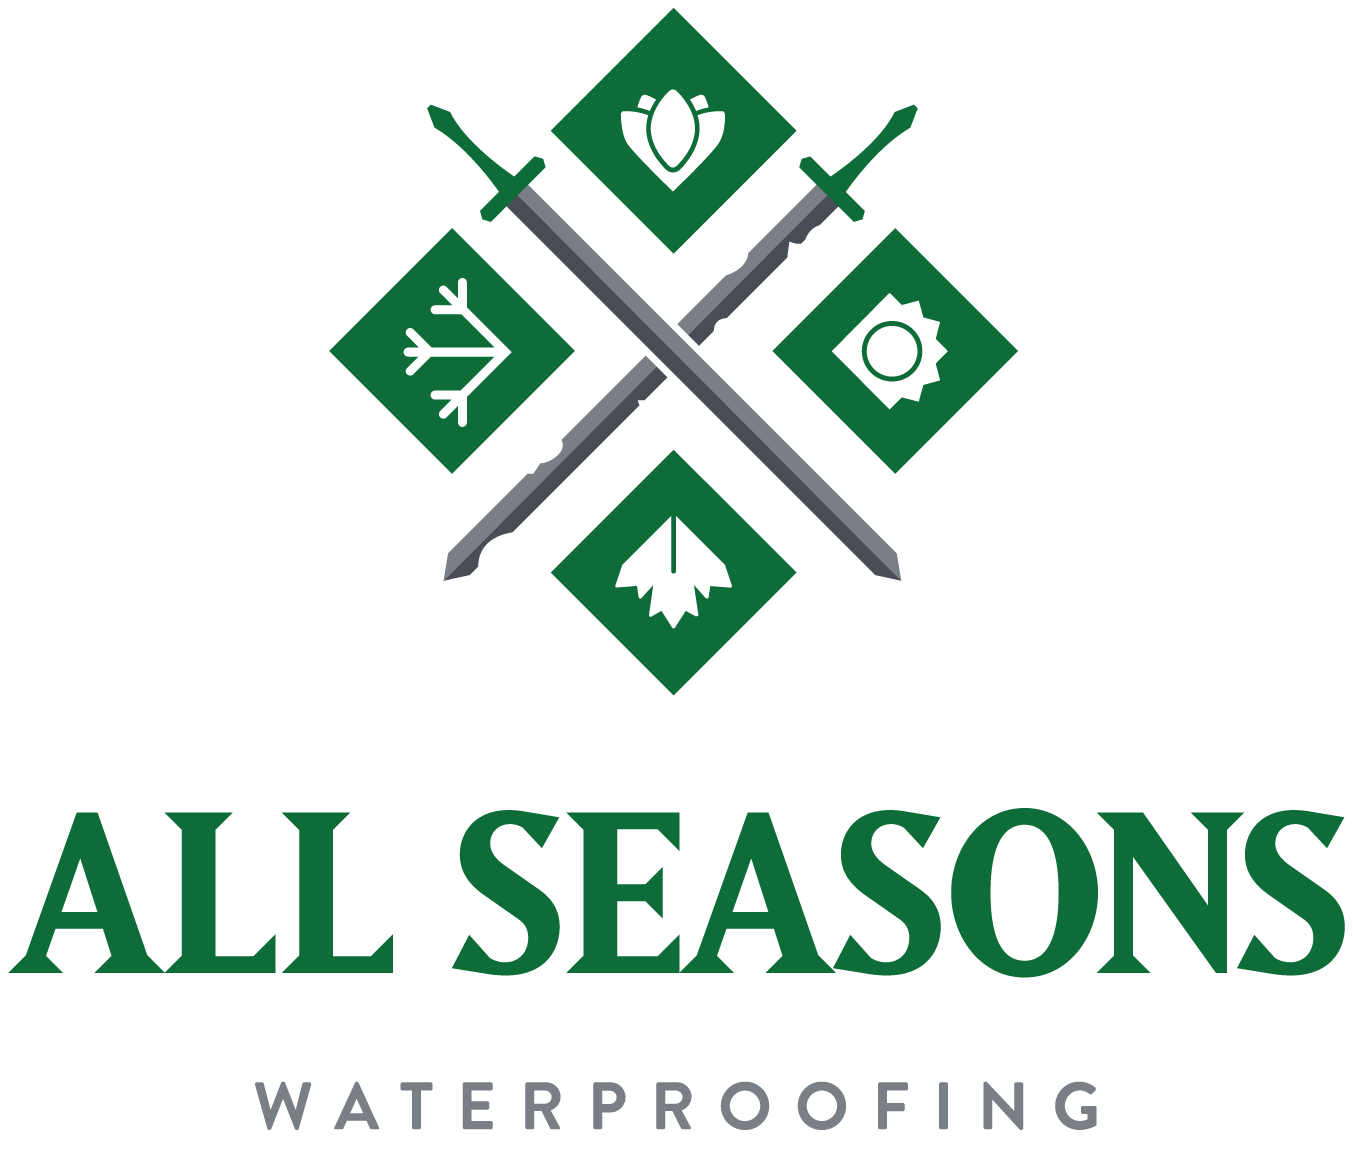 All Seasons Water Proofing Inc.'s logo